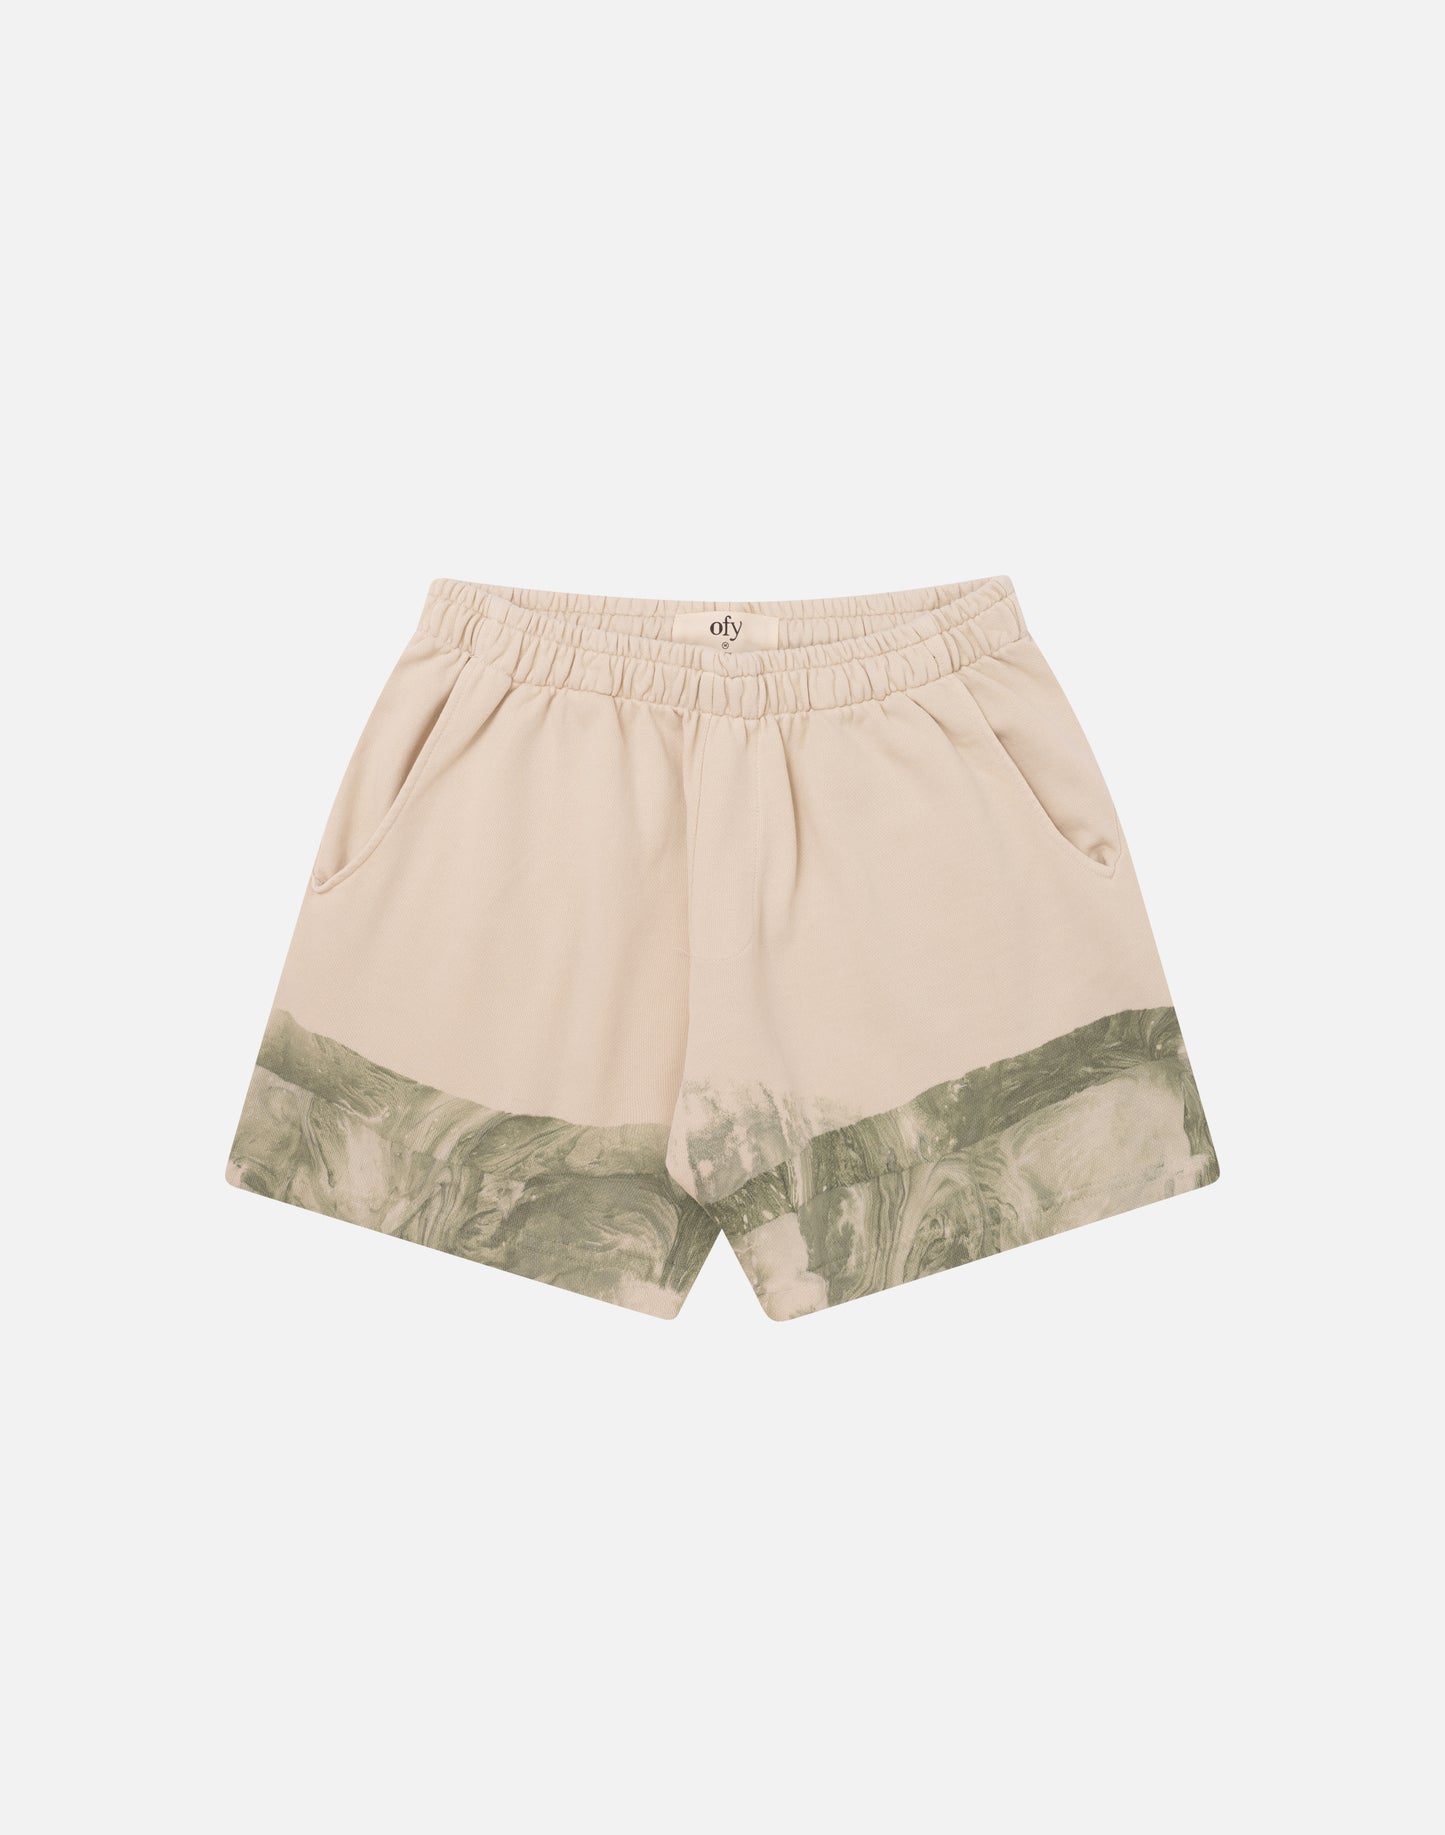 Cruise Short - Forest Marble Dip